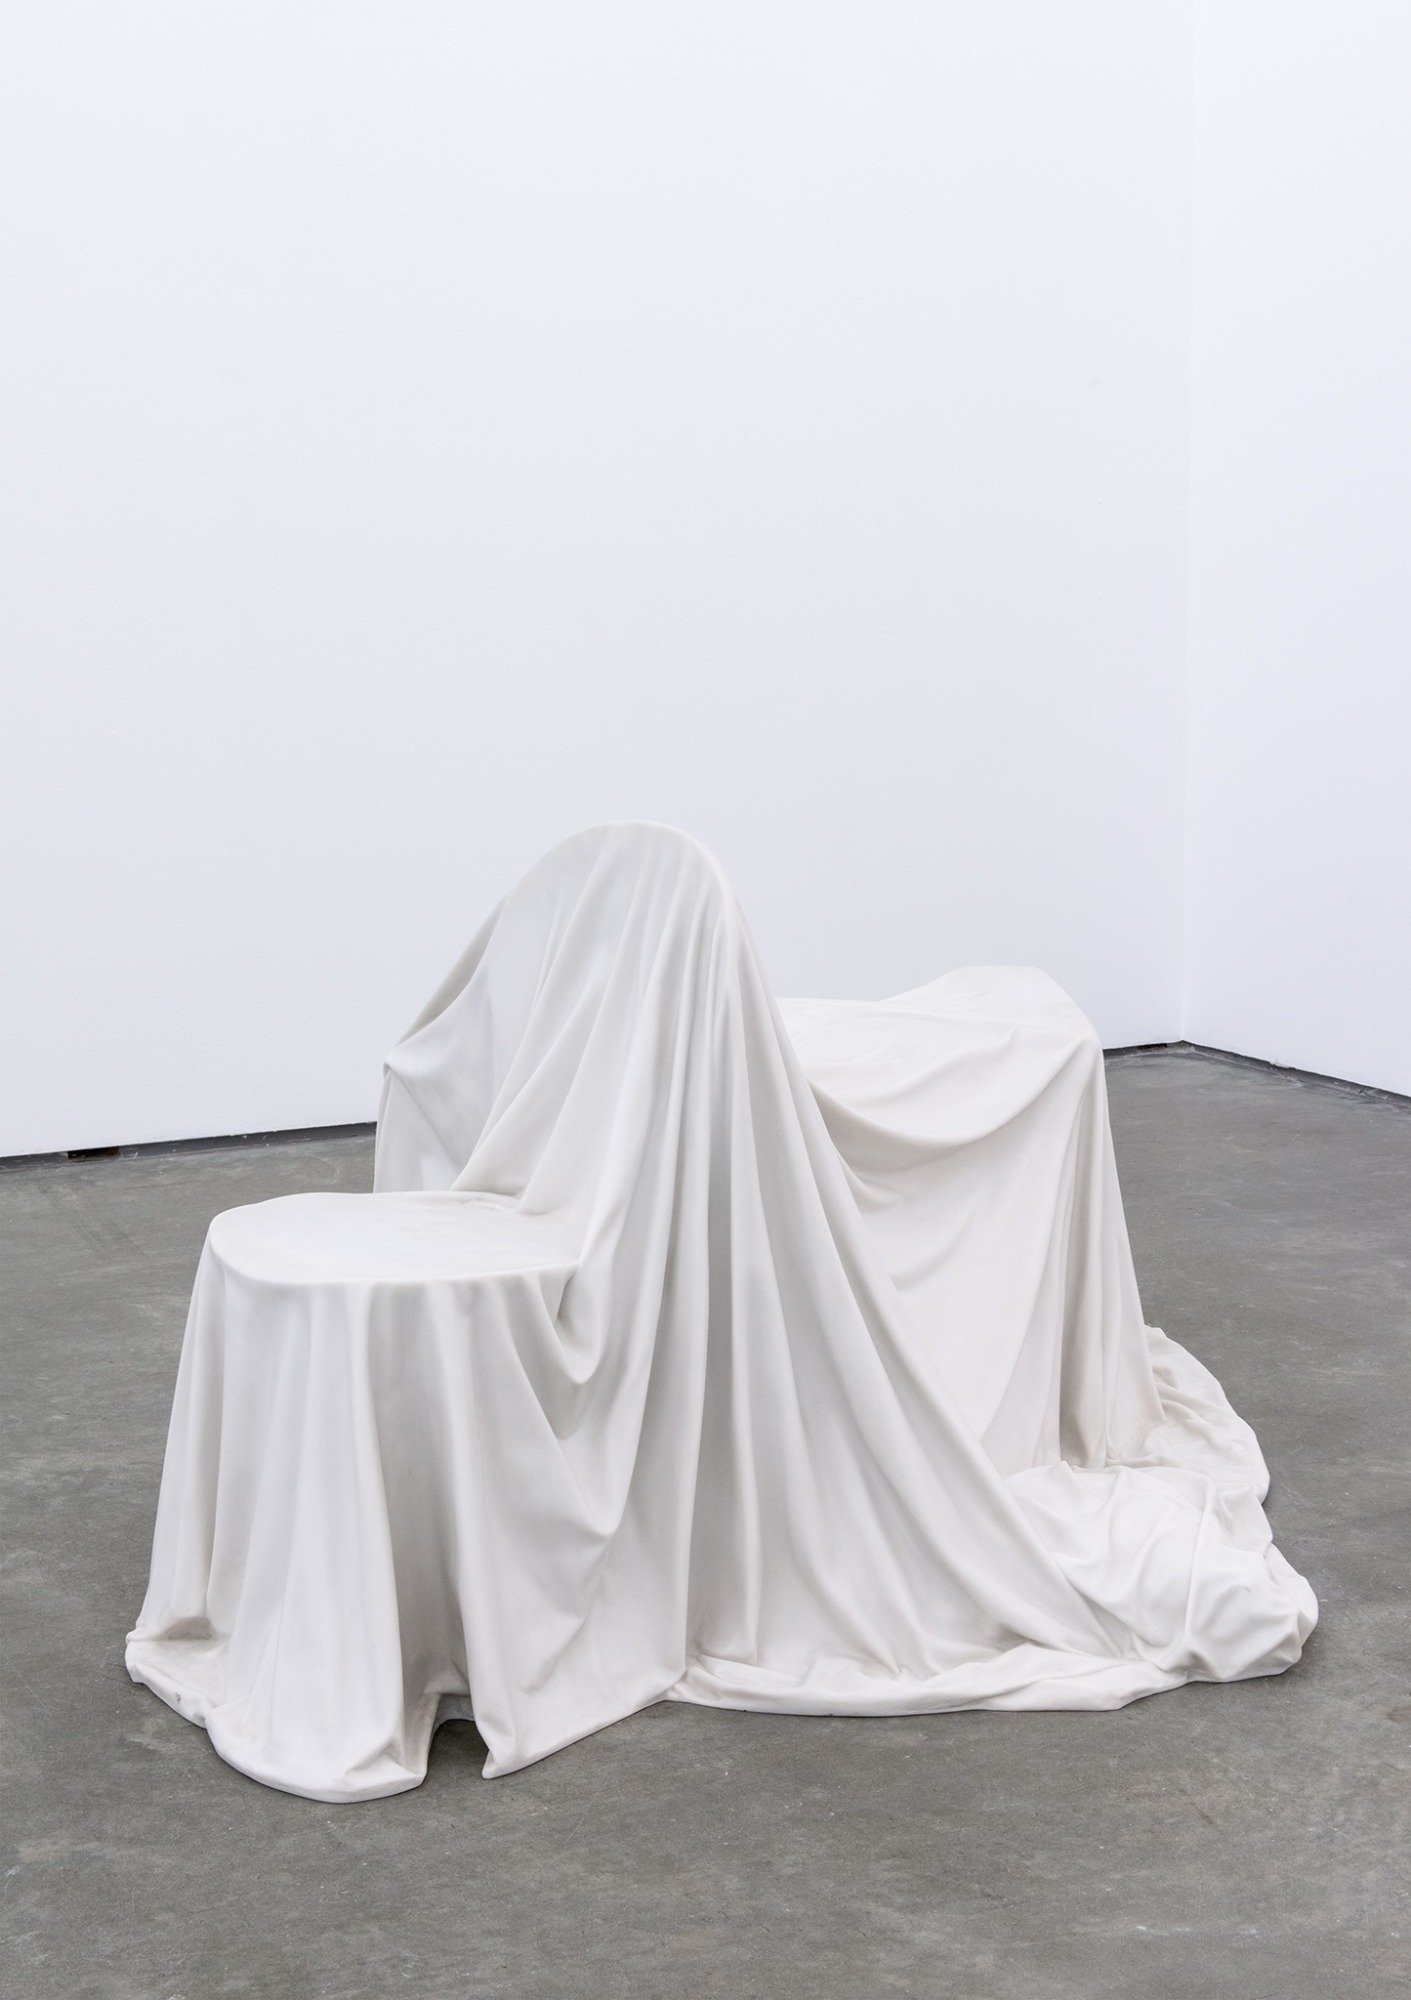 Make every show like it's your last Ryan Gander